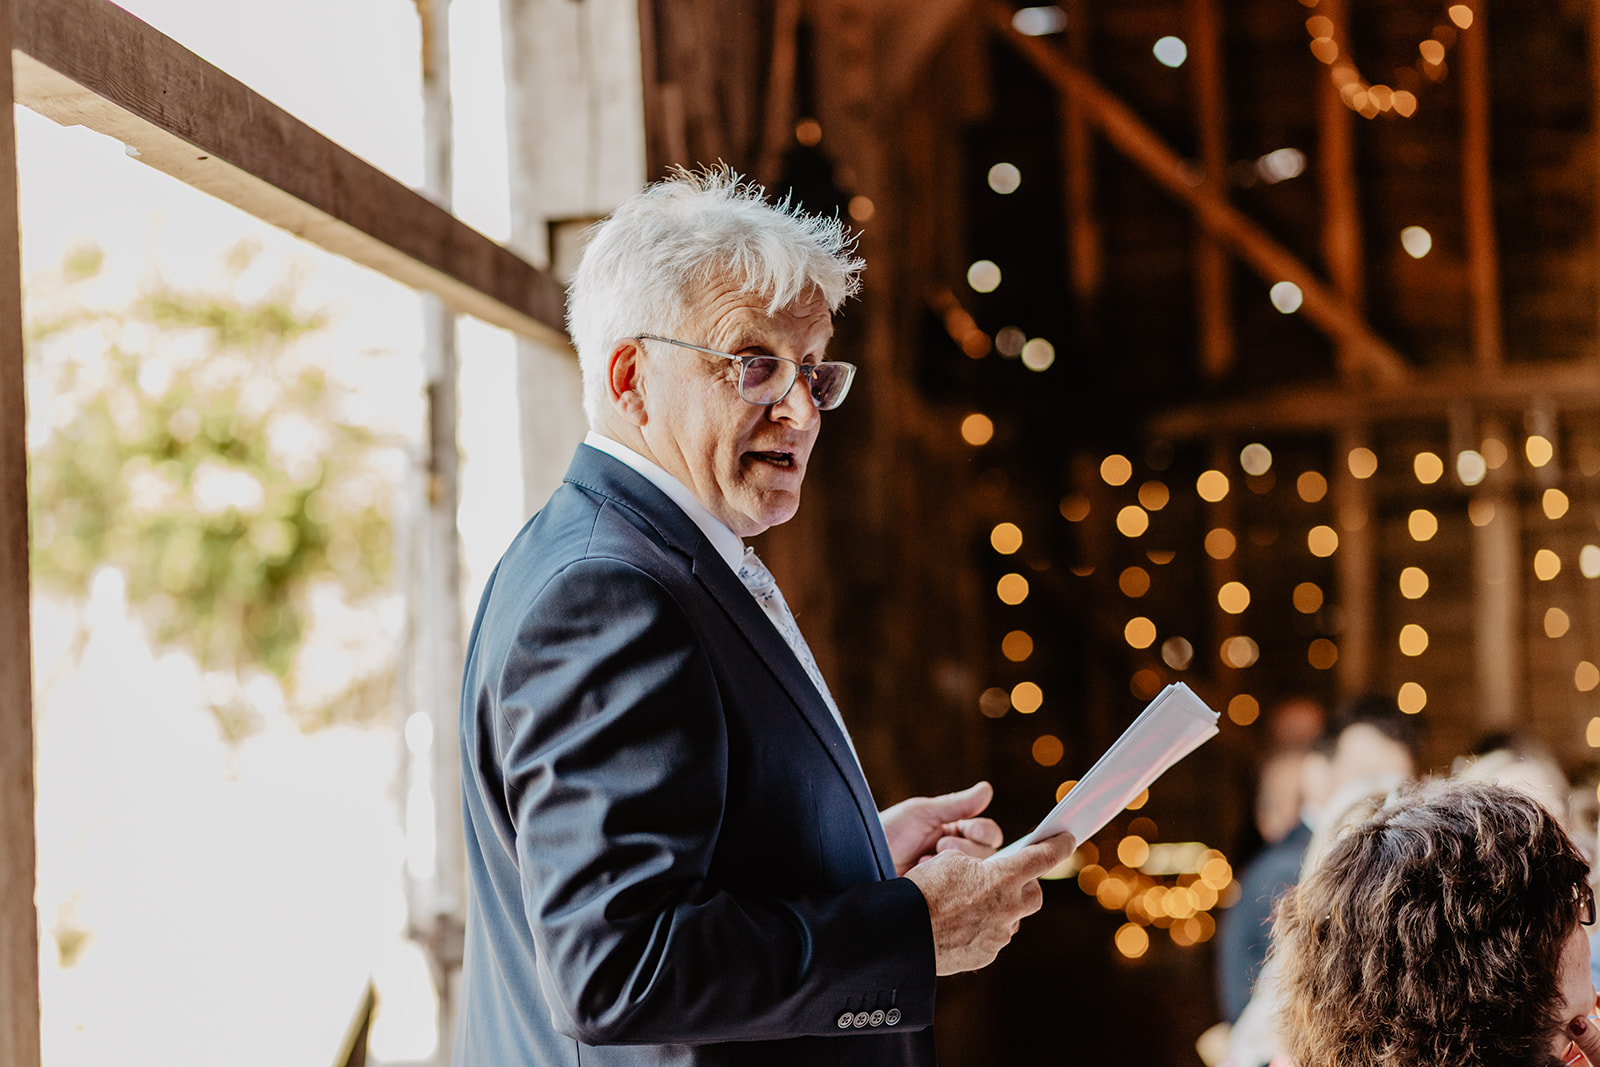 Wedding speeches at a Secret Barn Wedding, West Sussex. By Olive Joy Photography